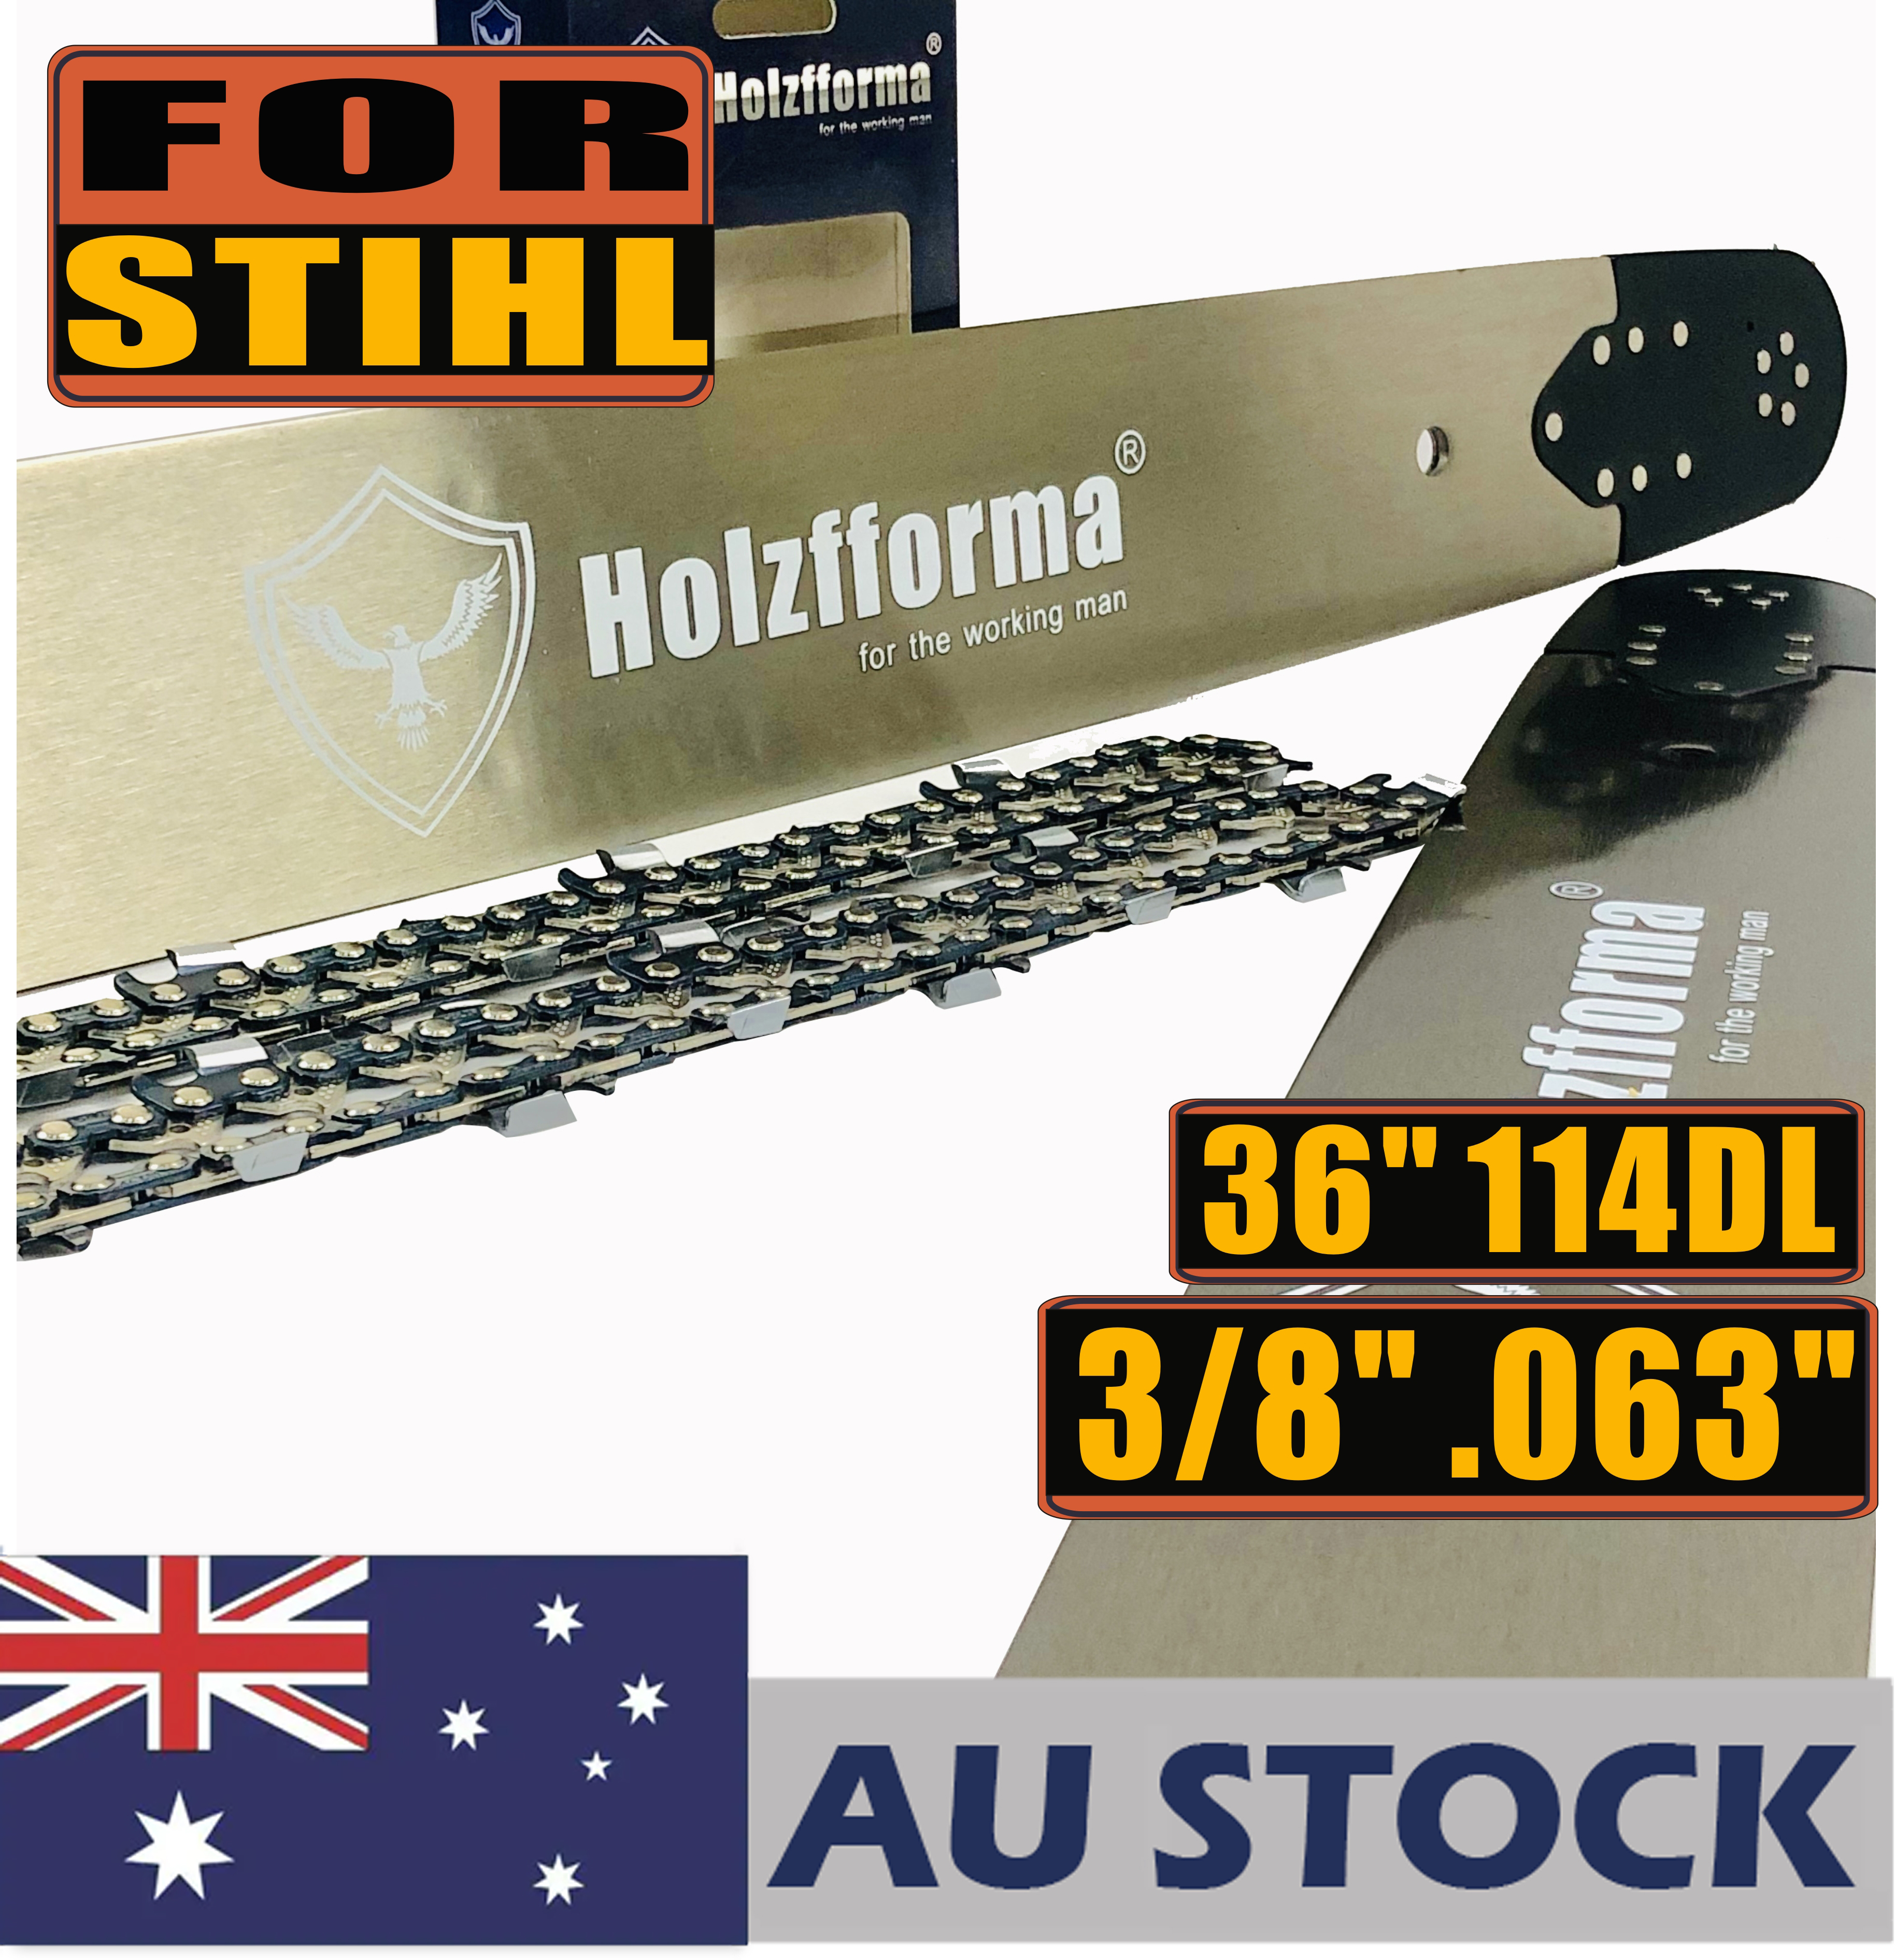 AU STOCK only to AU ADDRESS - Holzfforma® Pro 36 Inch 3/8 .063 114DL Solid Bar & Full Chisel Chain Combo For Stihl MS440 MS441 MS460 MS461 MS660 MS661 MS650 066 065 064 Chainsaw 2-4 Days Delivery Time Fast Shipping For AU Customers Only